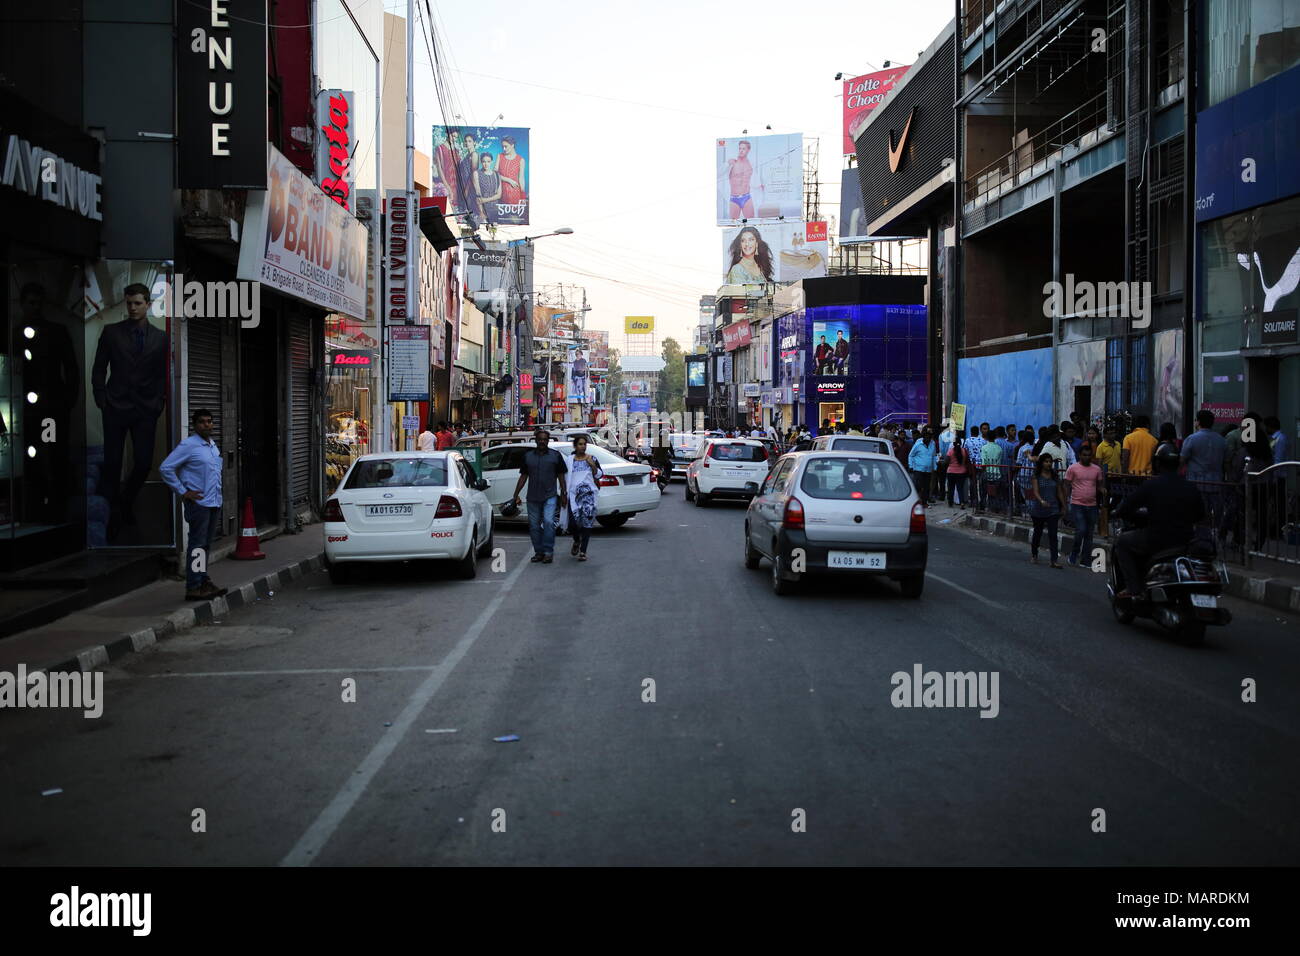 Bangalore, India - October 16, 2016: Moving traffic and crowd in rush hours at Brigade Road, Bangalore. Stock Photo